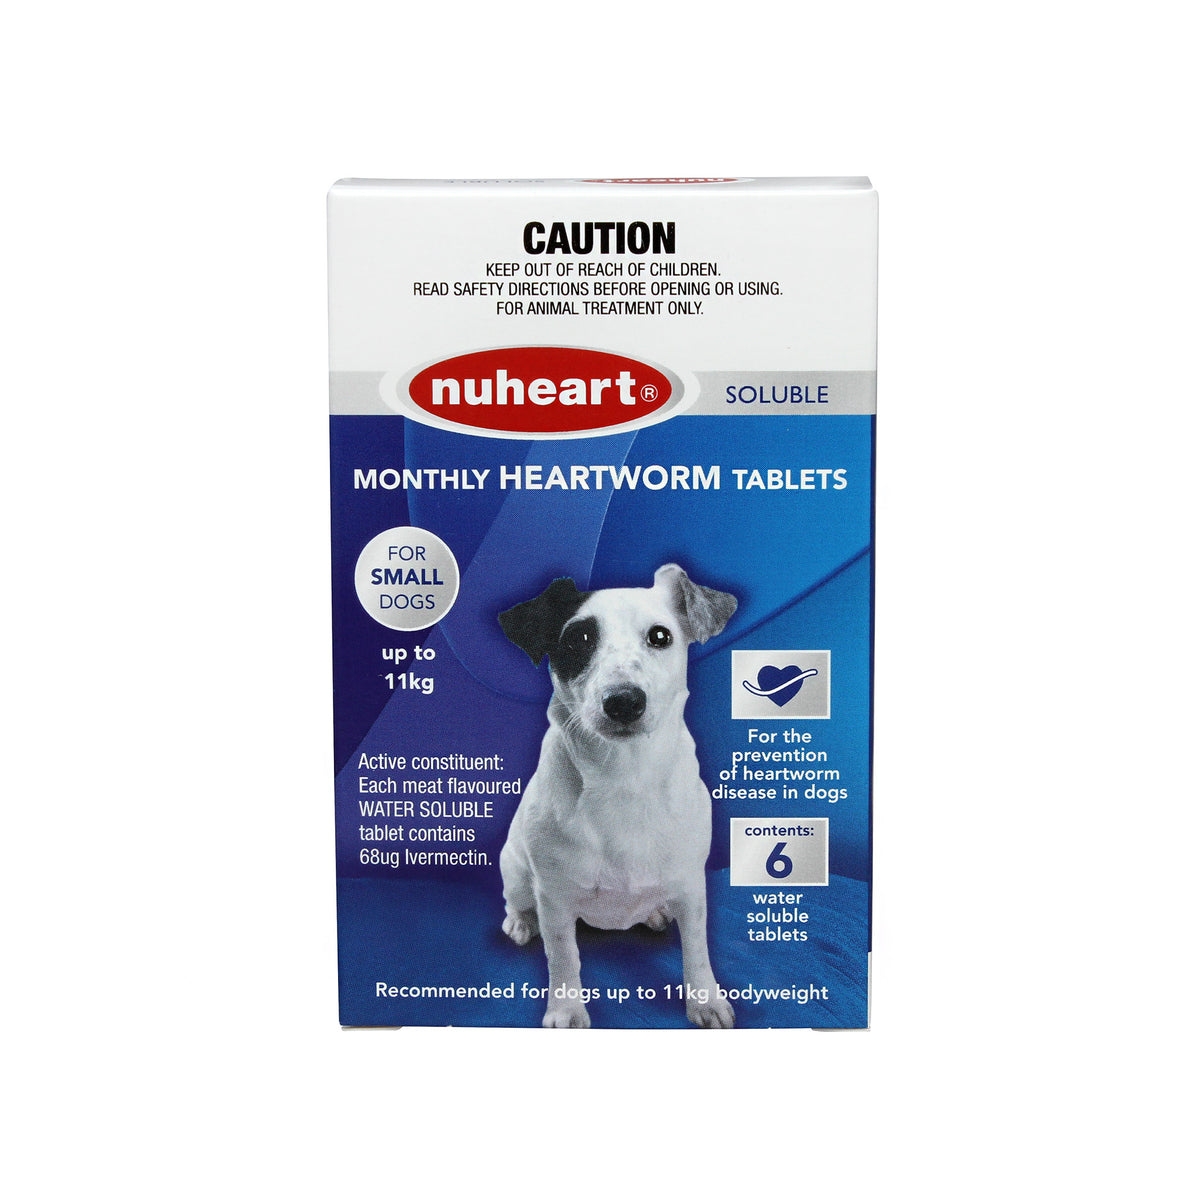 Nuheart Soluble Monthly Heartworm Tablets